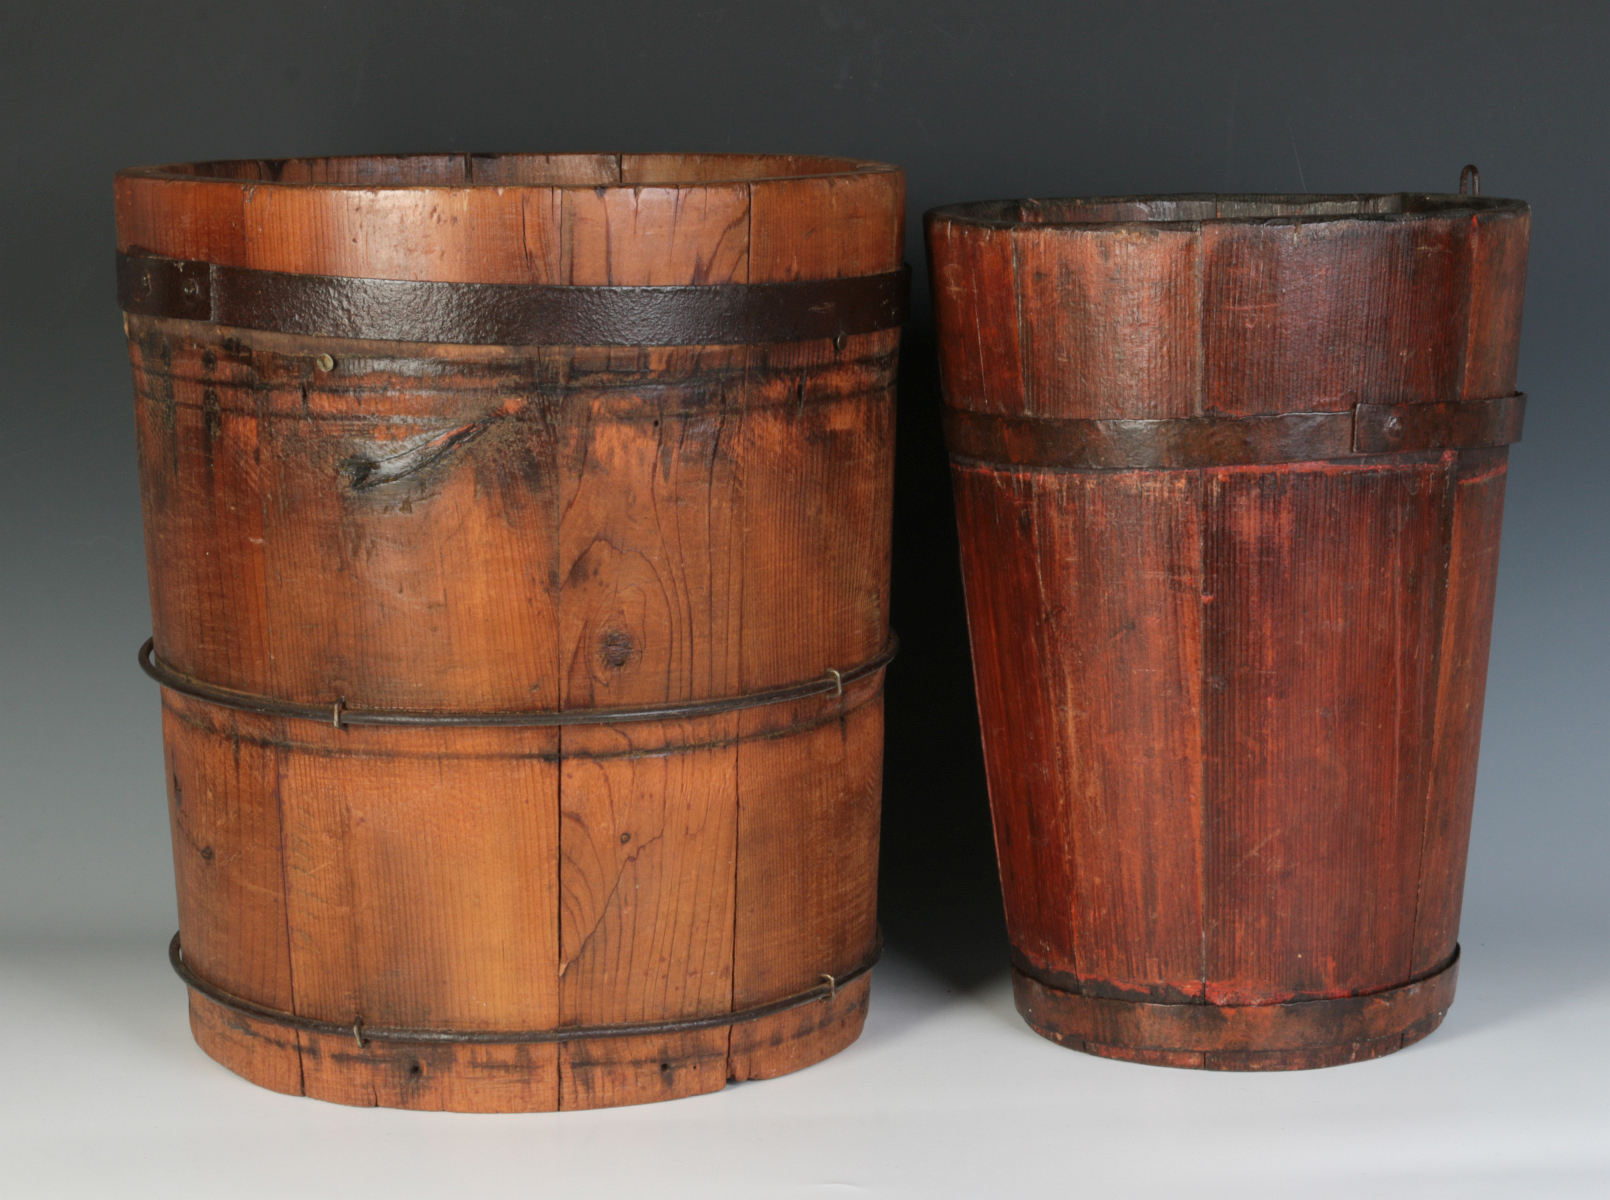 TWO GOOD 19TH CENTURY WOOD STAVE CONTAINERS